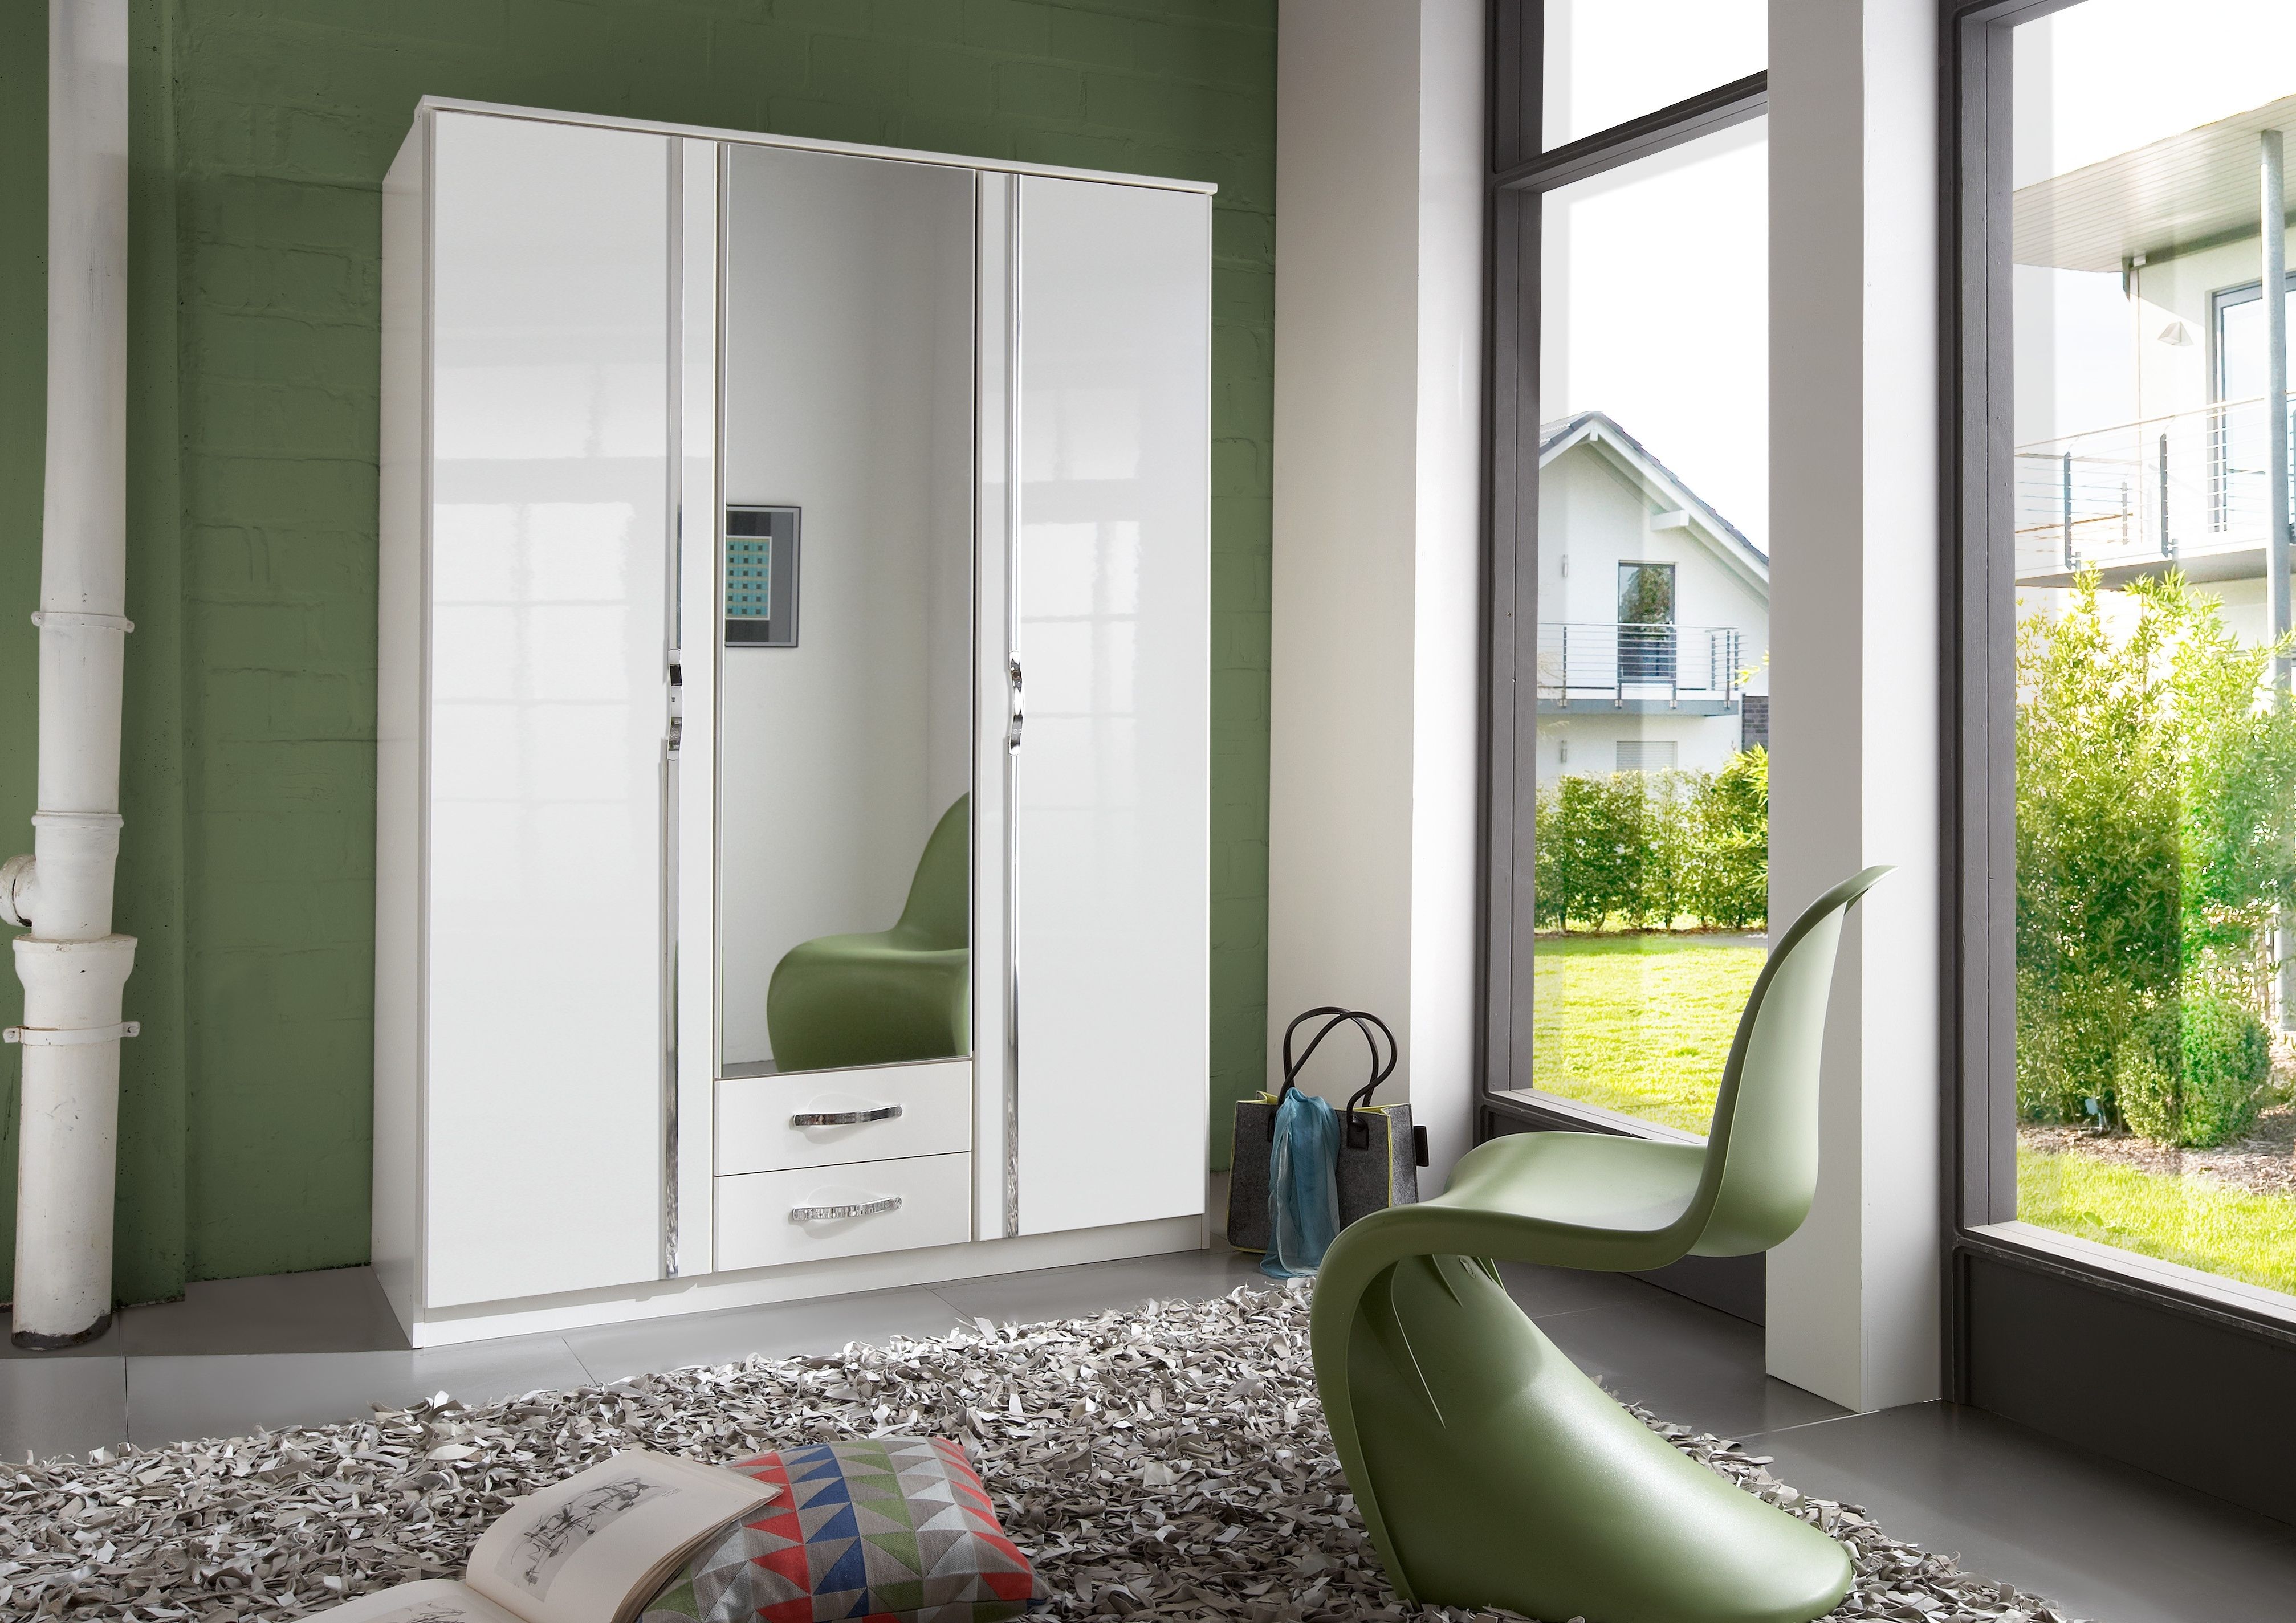 White 3 Door Wardrobes With Drawers With Regard To Famous White Wardrobe With Mirror Amazon Drawers And Sliding Door Doors (View 8 of 15)